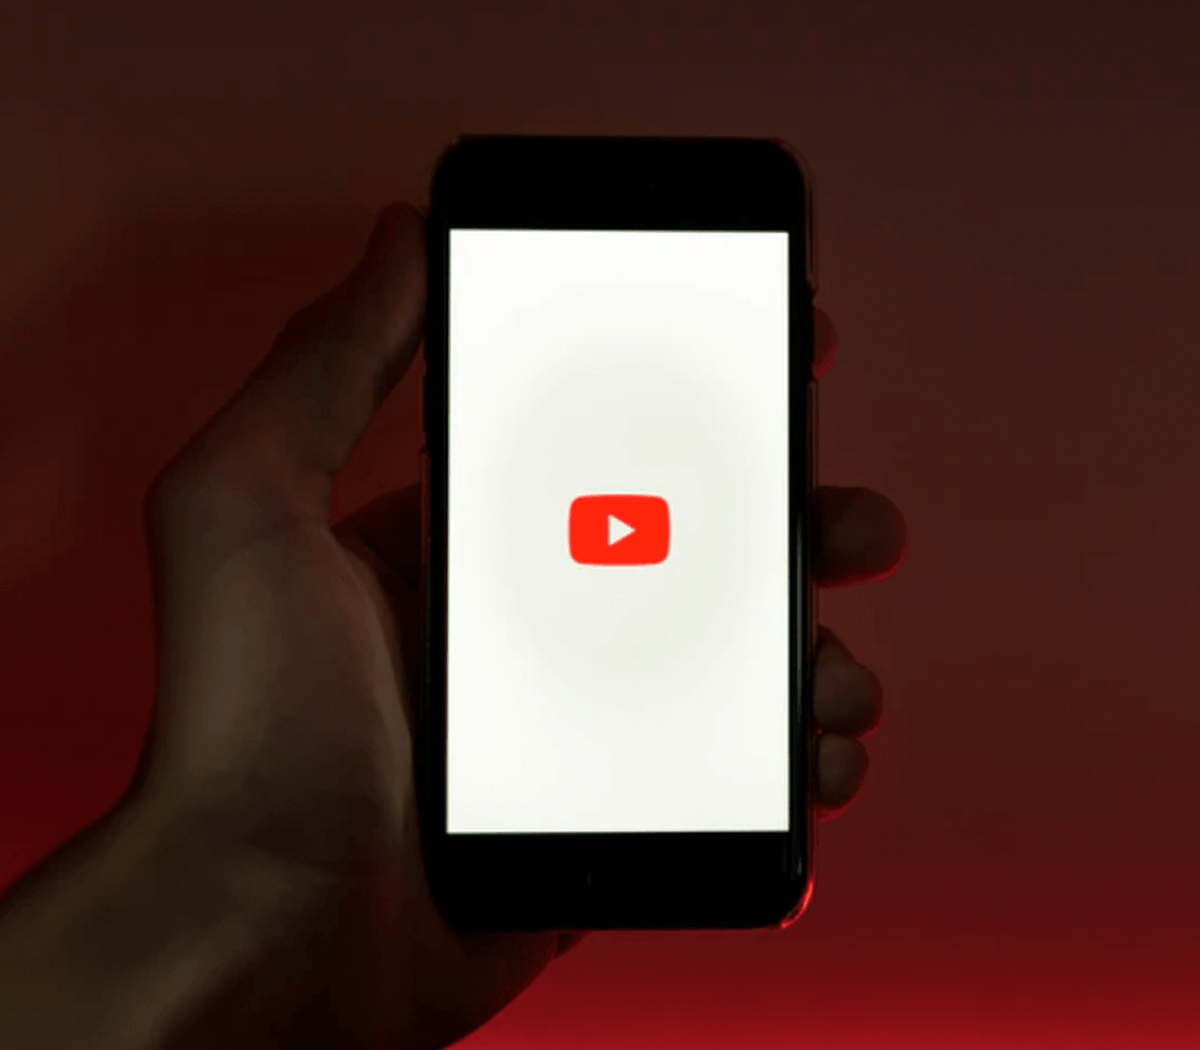 77 YouTube Video Statistics to establish growth in 2022. 